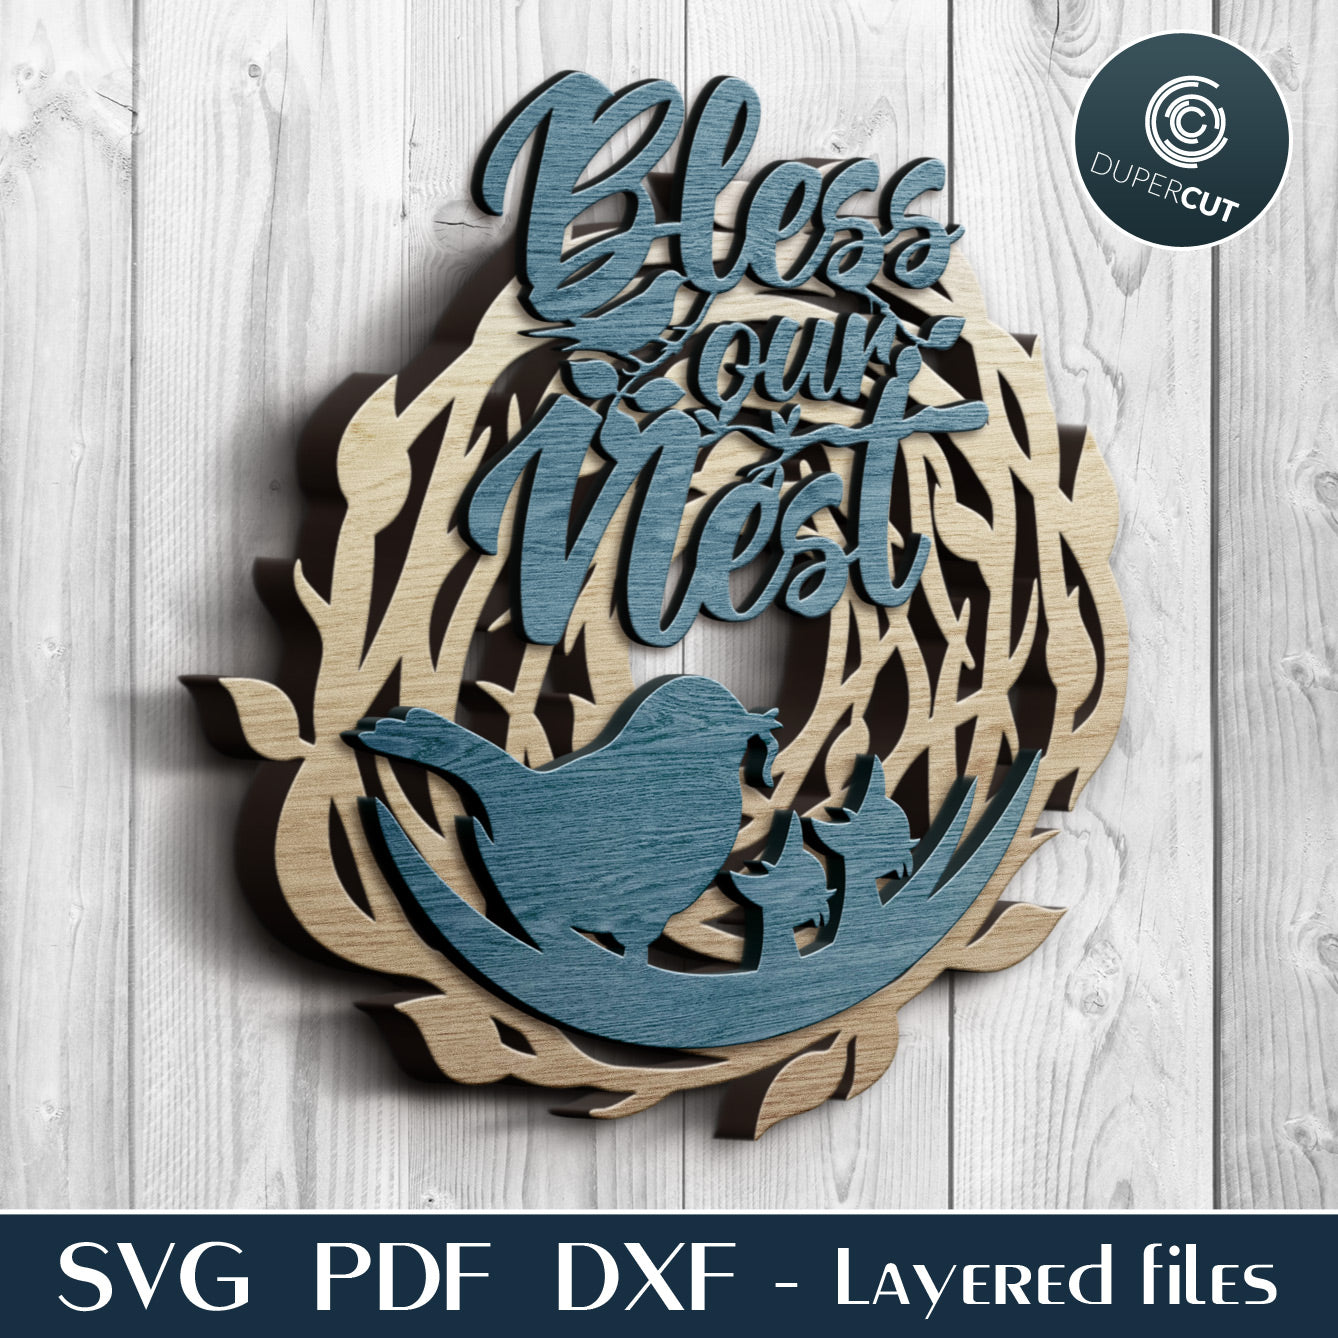 Interchangeable Birds family nest layered template. SVG PDF DXF files for laser cutting, engraving, Cricut, Silhouette Cameo, Glowforge, CNC Plasma machines by DuperCut